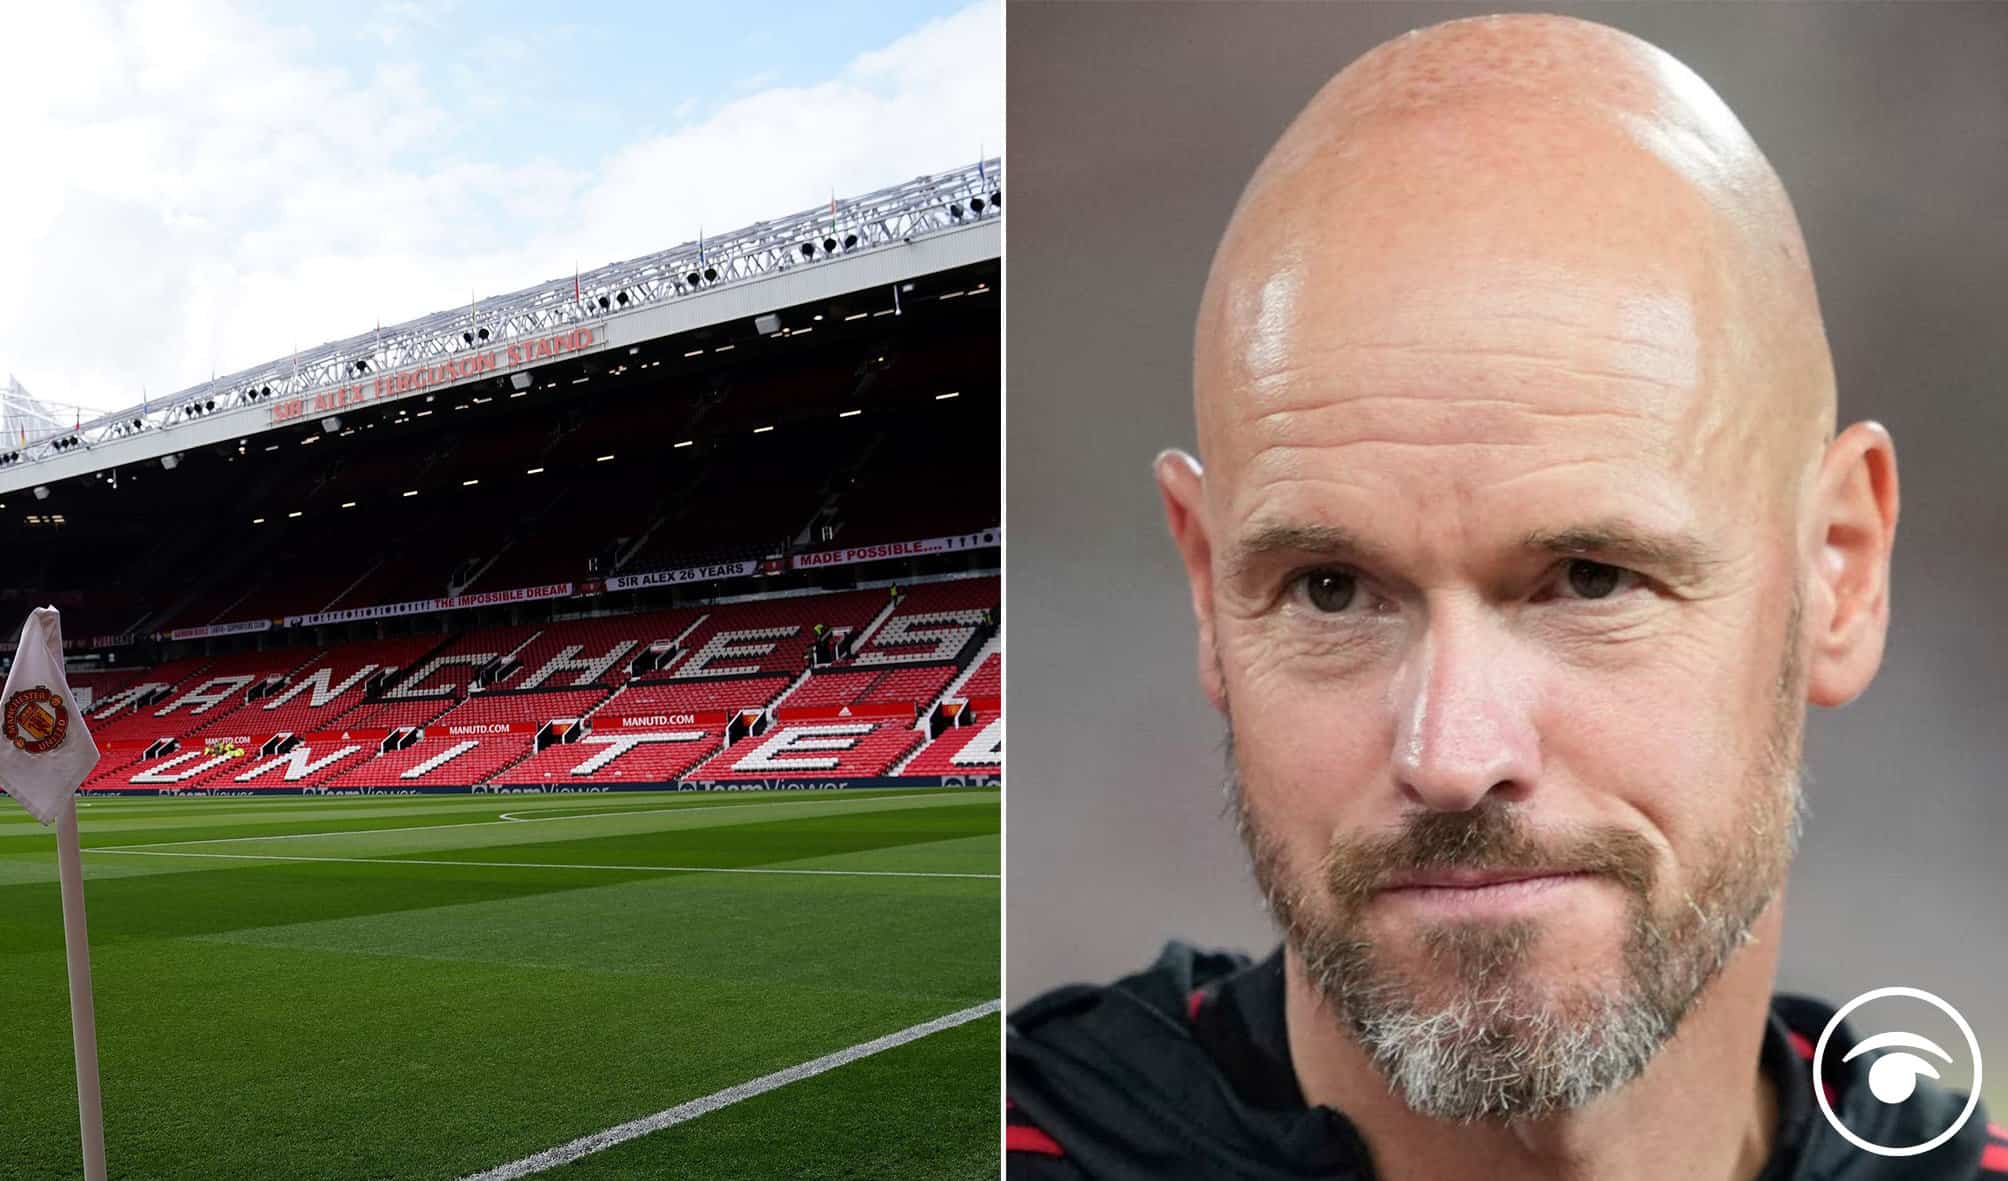 Ex player’s prediction for Manchester United’s season has people shaking their heads